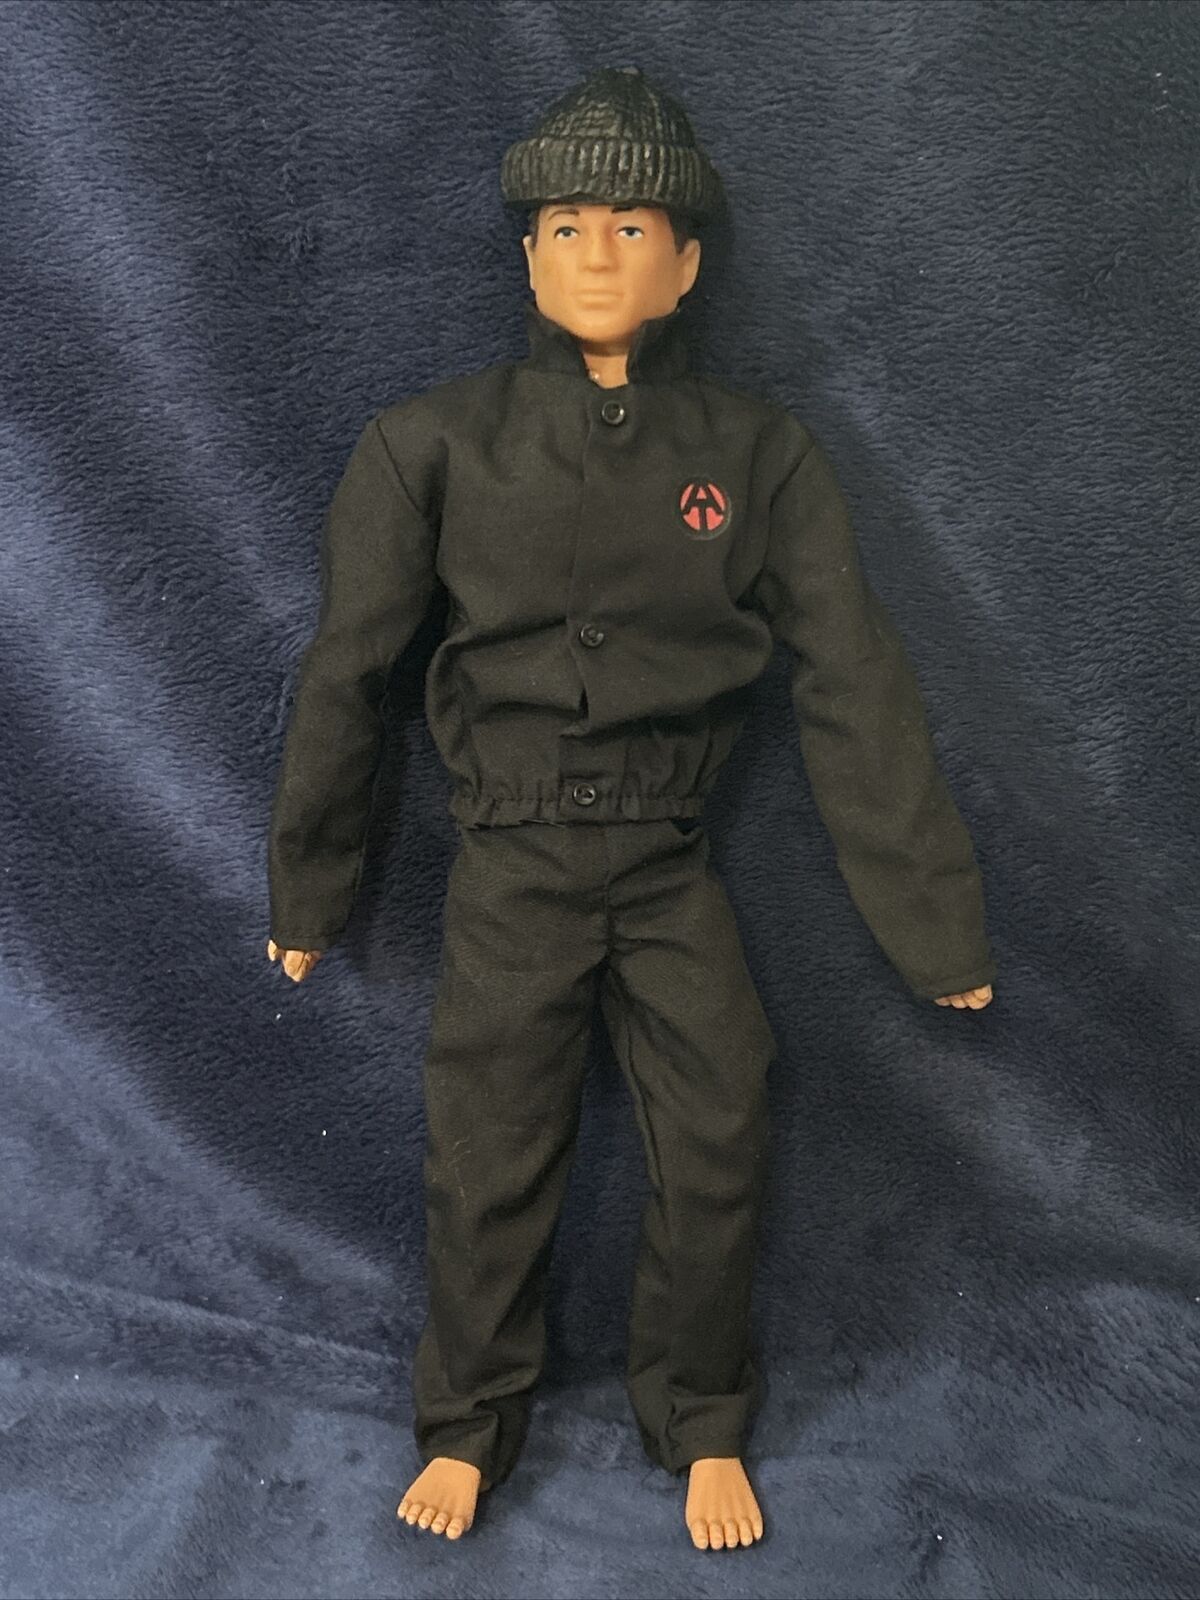 GI JOE ADVENTURE TEAM MAN OF ACTION W/ Kung Fu Grip, Hat, Blk Outfit, and Hair!￼